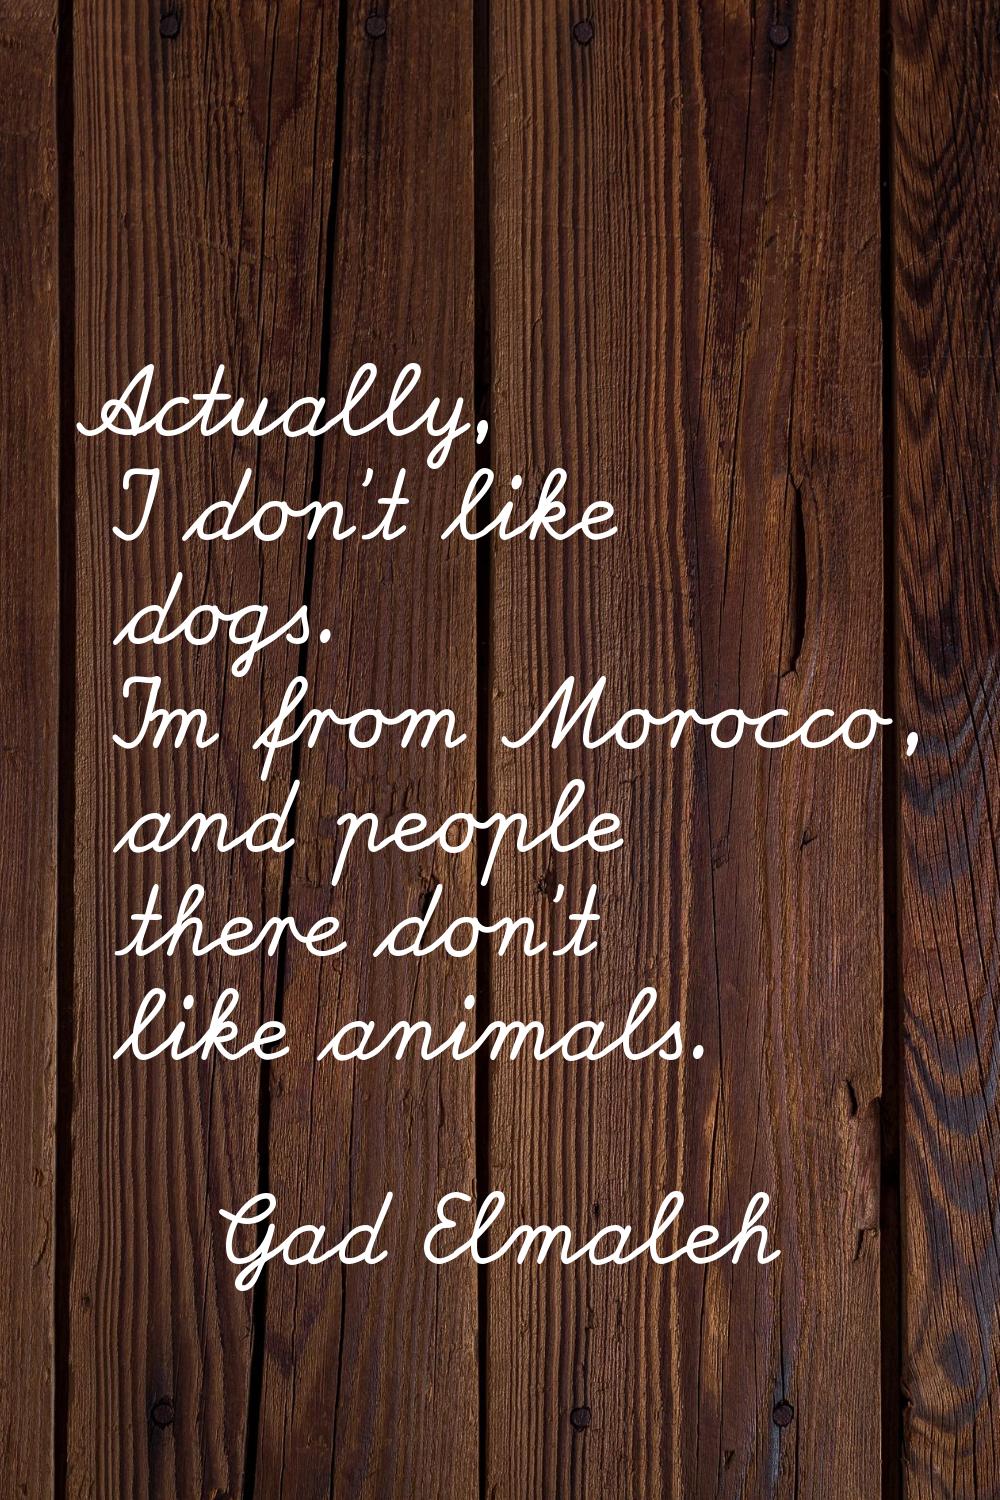 Actually, I don't like dogs. I'm from Morocco, and people there don't like animals.